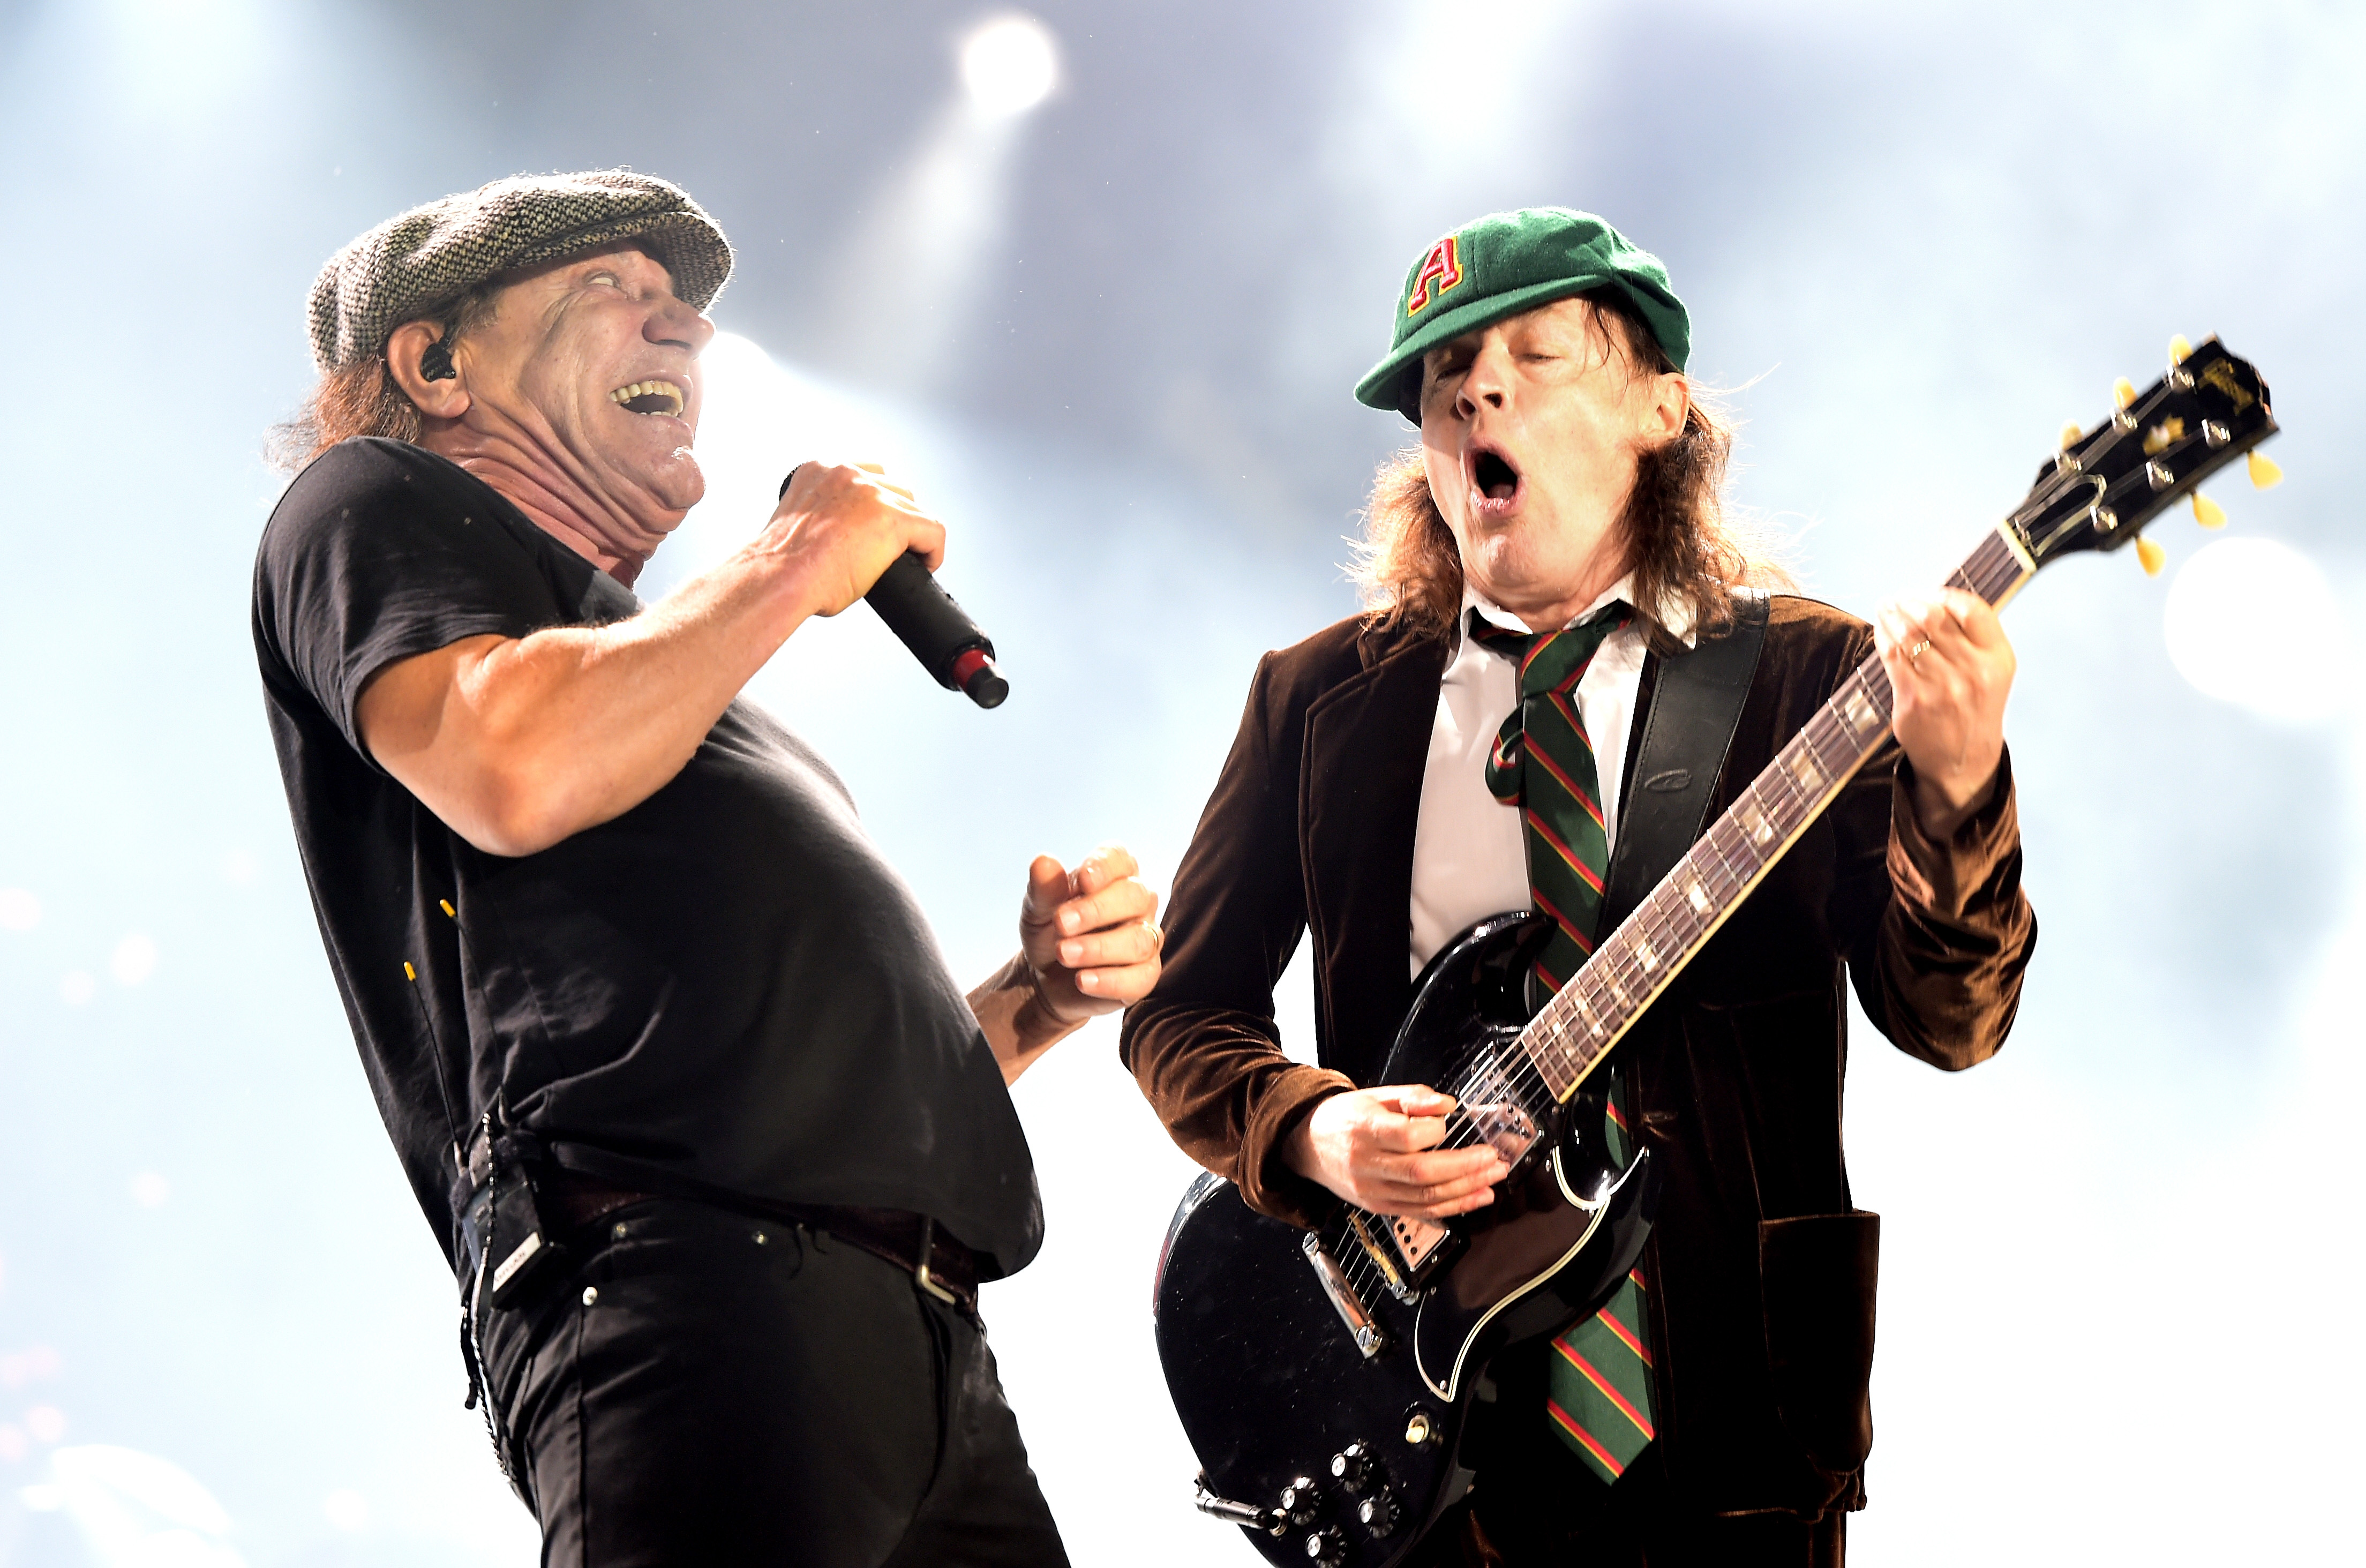 What's an AC/DC concert really like? Check this out - NZ